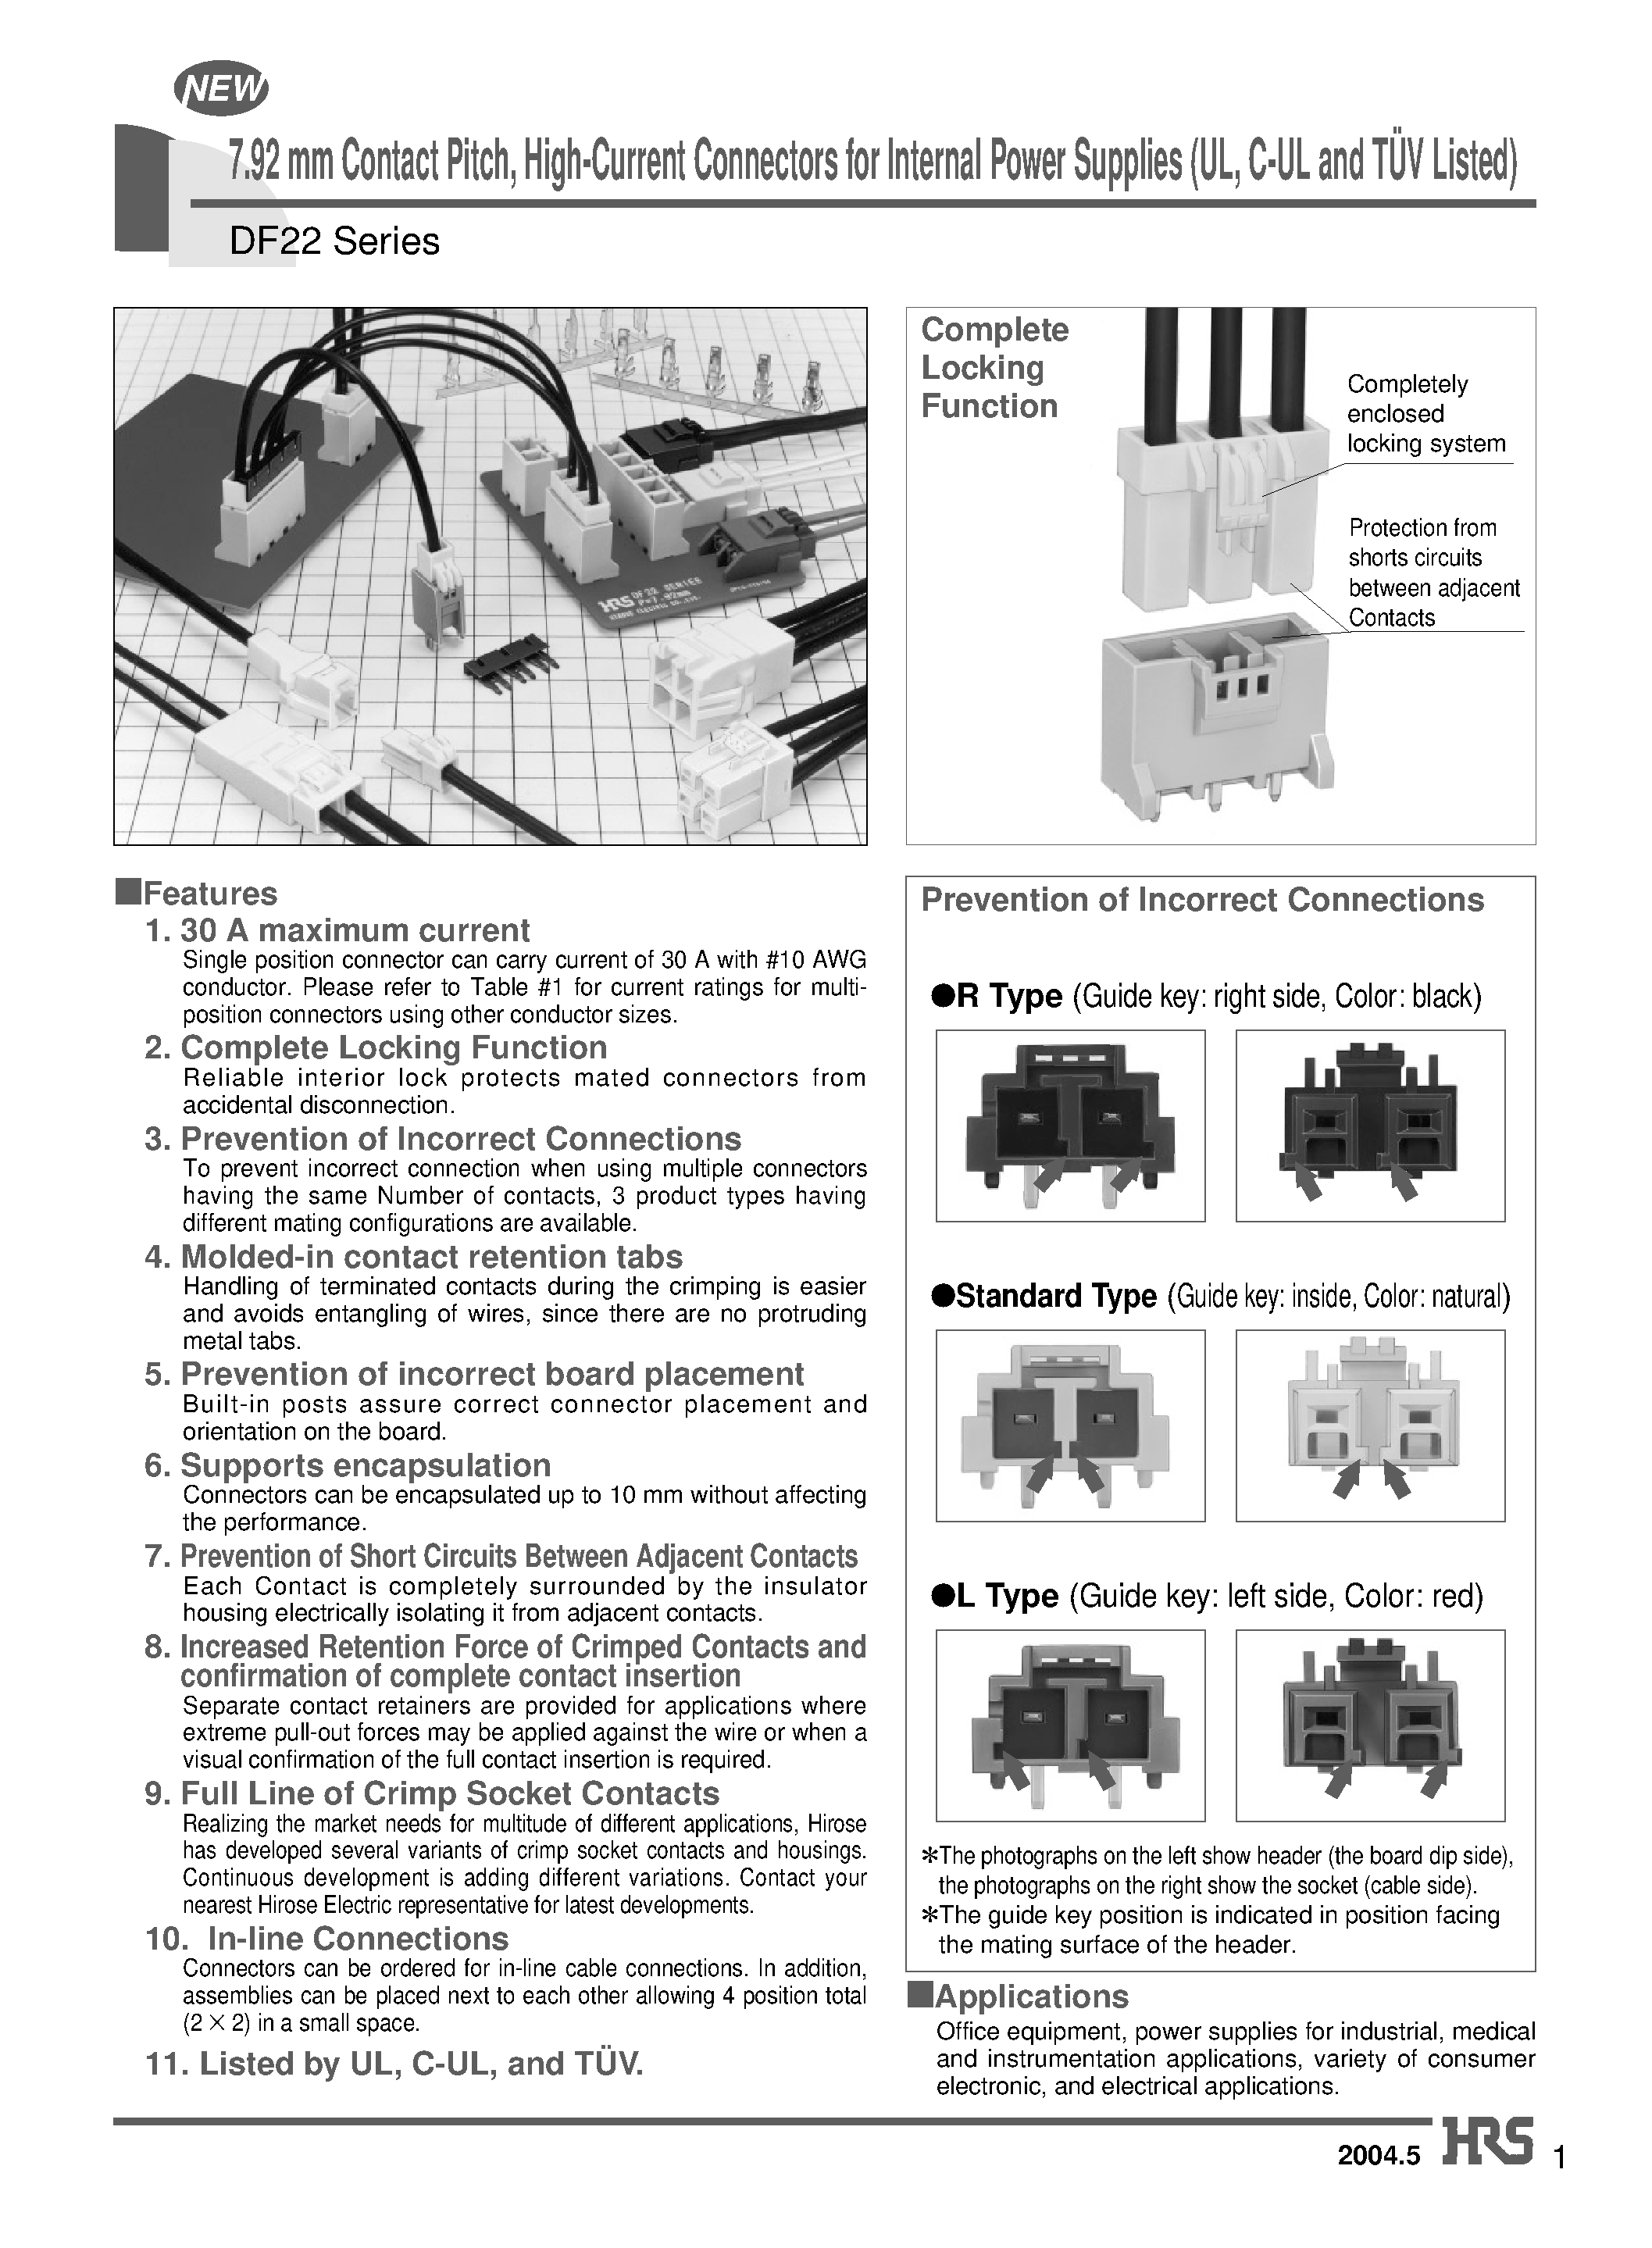 Datasheet DF22-3P-7.92C - 7.92 mm Contact Pitch/ High-Current Connectors for Internal Power Supplies (UL/ C-UL and TUV Listed) page 1